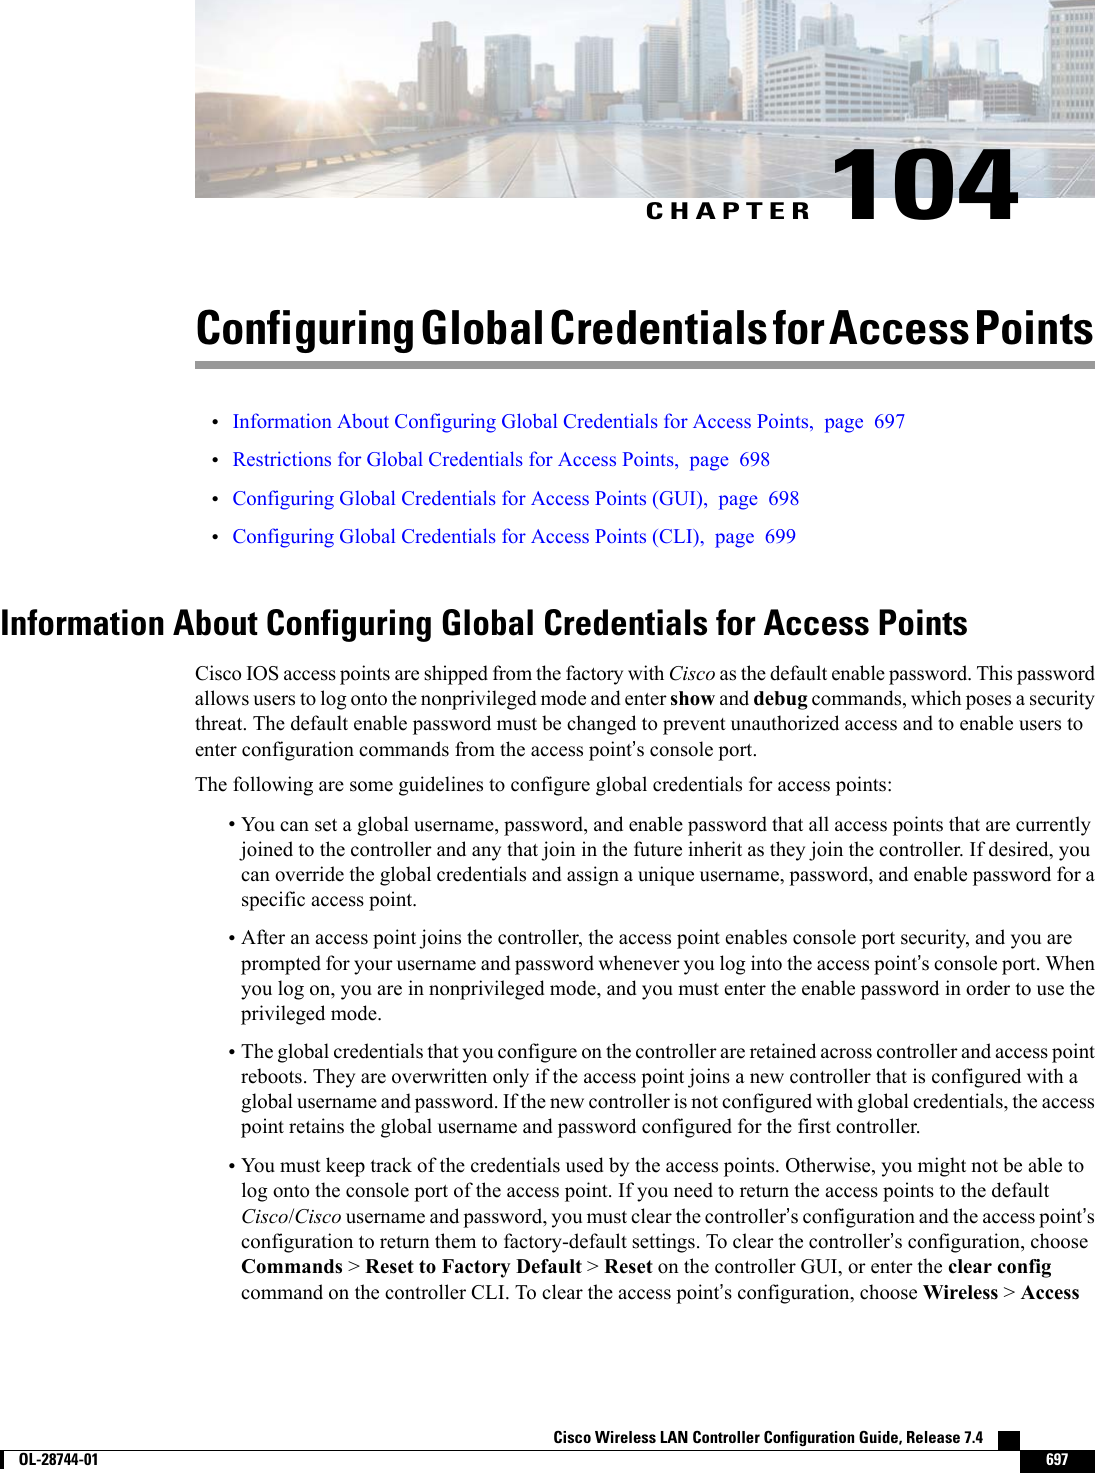 CHAPTER 104Configuring Global Credentials for Access Points•Information About Configuring Global Credentials for Access Points, page 697•Restrictions for Global Credentials for Access Points, page 698•Configuring Global Credentials for Access Points (GUI), page 698•Configuring Global Credentials for Access Points (CLI), page 699Information About Configuring Global Credentials for Access PointsCisco IOS access points are shipped from the factory with Cisco as the default enable password. This passwordallows users to log onto the nonprivileged mode and enter show and debug commands, which poses a securitythreat. The default enable password must be changed to prevent unauthorized access and to enable users toenter configuration commands from the access point’s console port.The following are some guidelines to configure global credentials for access points:•You can set a global username, password, and enable password that all access points that are currentlyjoined to the controller and any that join in the future inherit as they join the controller. If desired, youcan override the global credentials and assign a unique username, password, and enable password for aspecific access point.•After an access point joins the controller, the access point enables console port security, and you areprompted for your username and password whenever you log into the access point’s console port. Whenyou log on, you are in nonprivileged mode, and you must enter the enable password in order to use theprivileged mode.•The global credentials that you configure on the controller are retained across controller and access pointreboots. They are overwritten only if the access point joins a new controller that is configured with aglobal username and password. If the new controller is not configured with global credentials, the accesspoint retains the global username and password configured for the first controller.•You must keep track of the credentials used by the access points. Otherwise, you might not be able tolog onto the console port of the access point. If you need to return the access points to the defaultCisco/Cisco username and password, you must clear the controller’s configuration and the access point’sconfiguration to return them to factory-default settings. To clear the controller’s configuration, chooseCommands &gt;Reset to Factory Default &gt;Reset on the controller GUI, or enter the clear configcommand on the controller CLI. To clear the access point’s configuration, choose Wireless &gt;AccessCisco Wireless LAN Controller Configuration Guide, Release 7.4        OL-28744-01 697